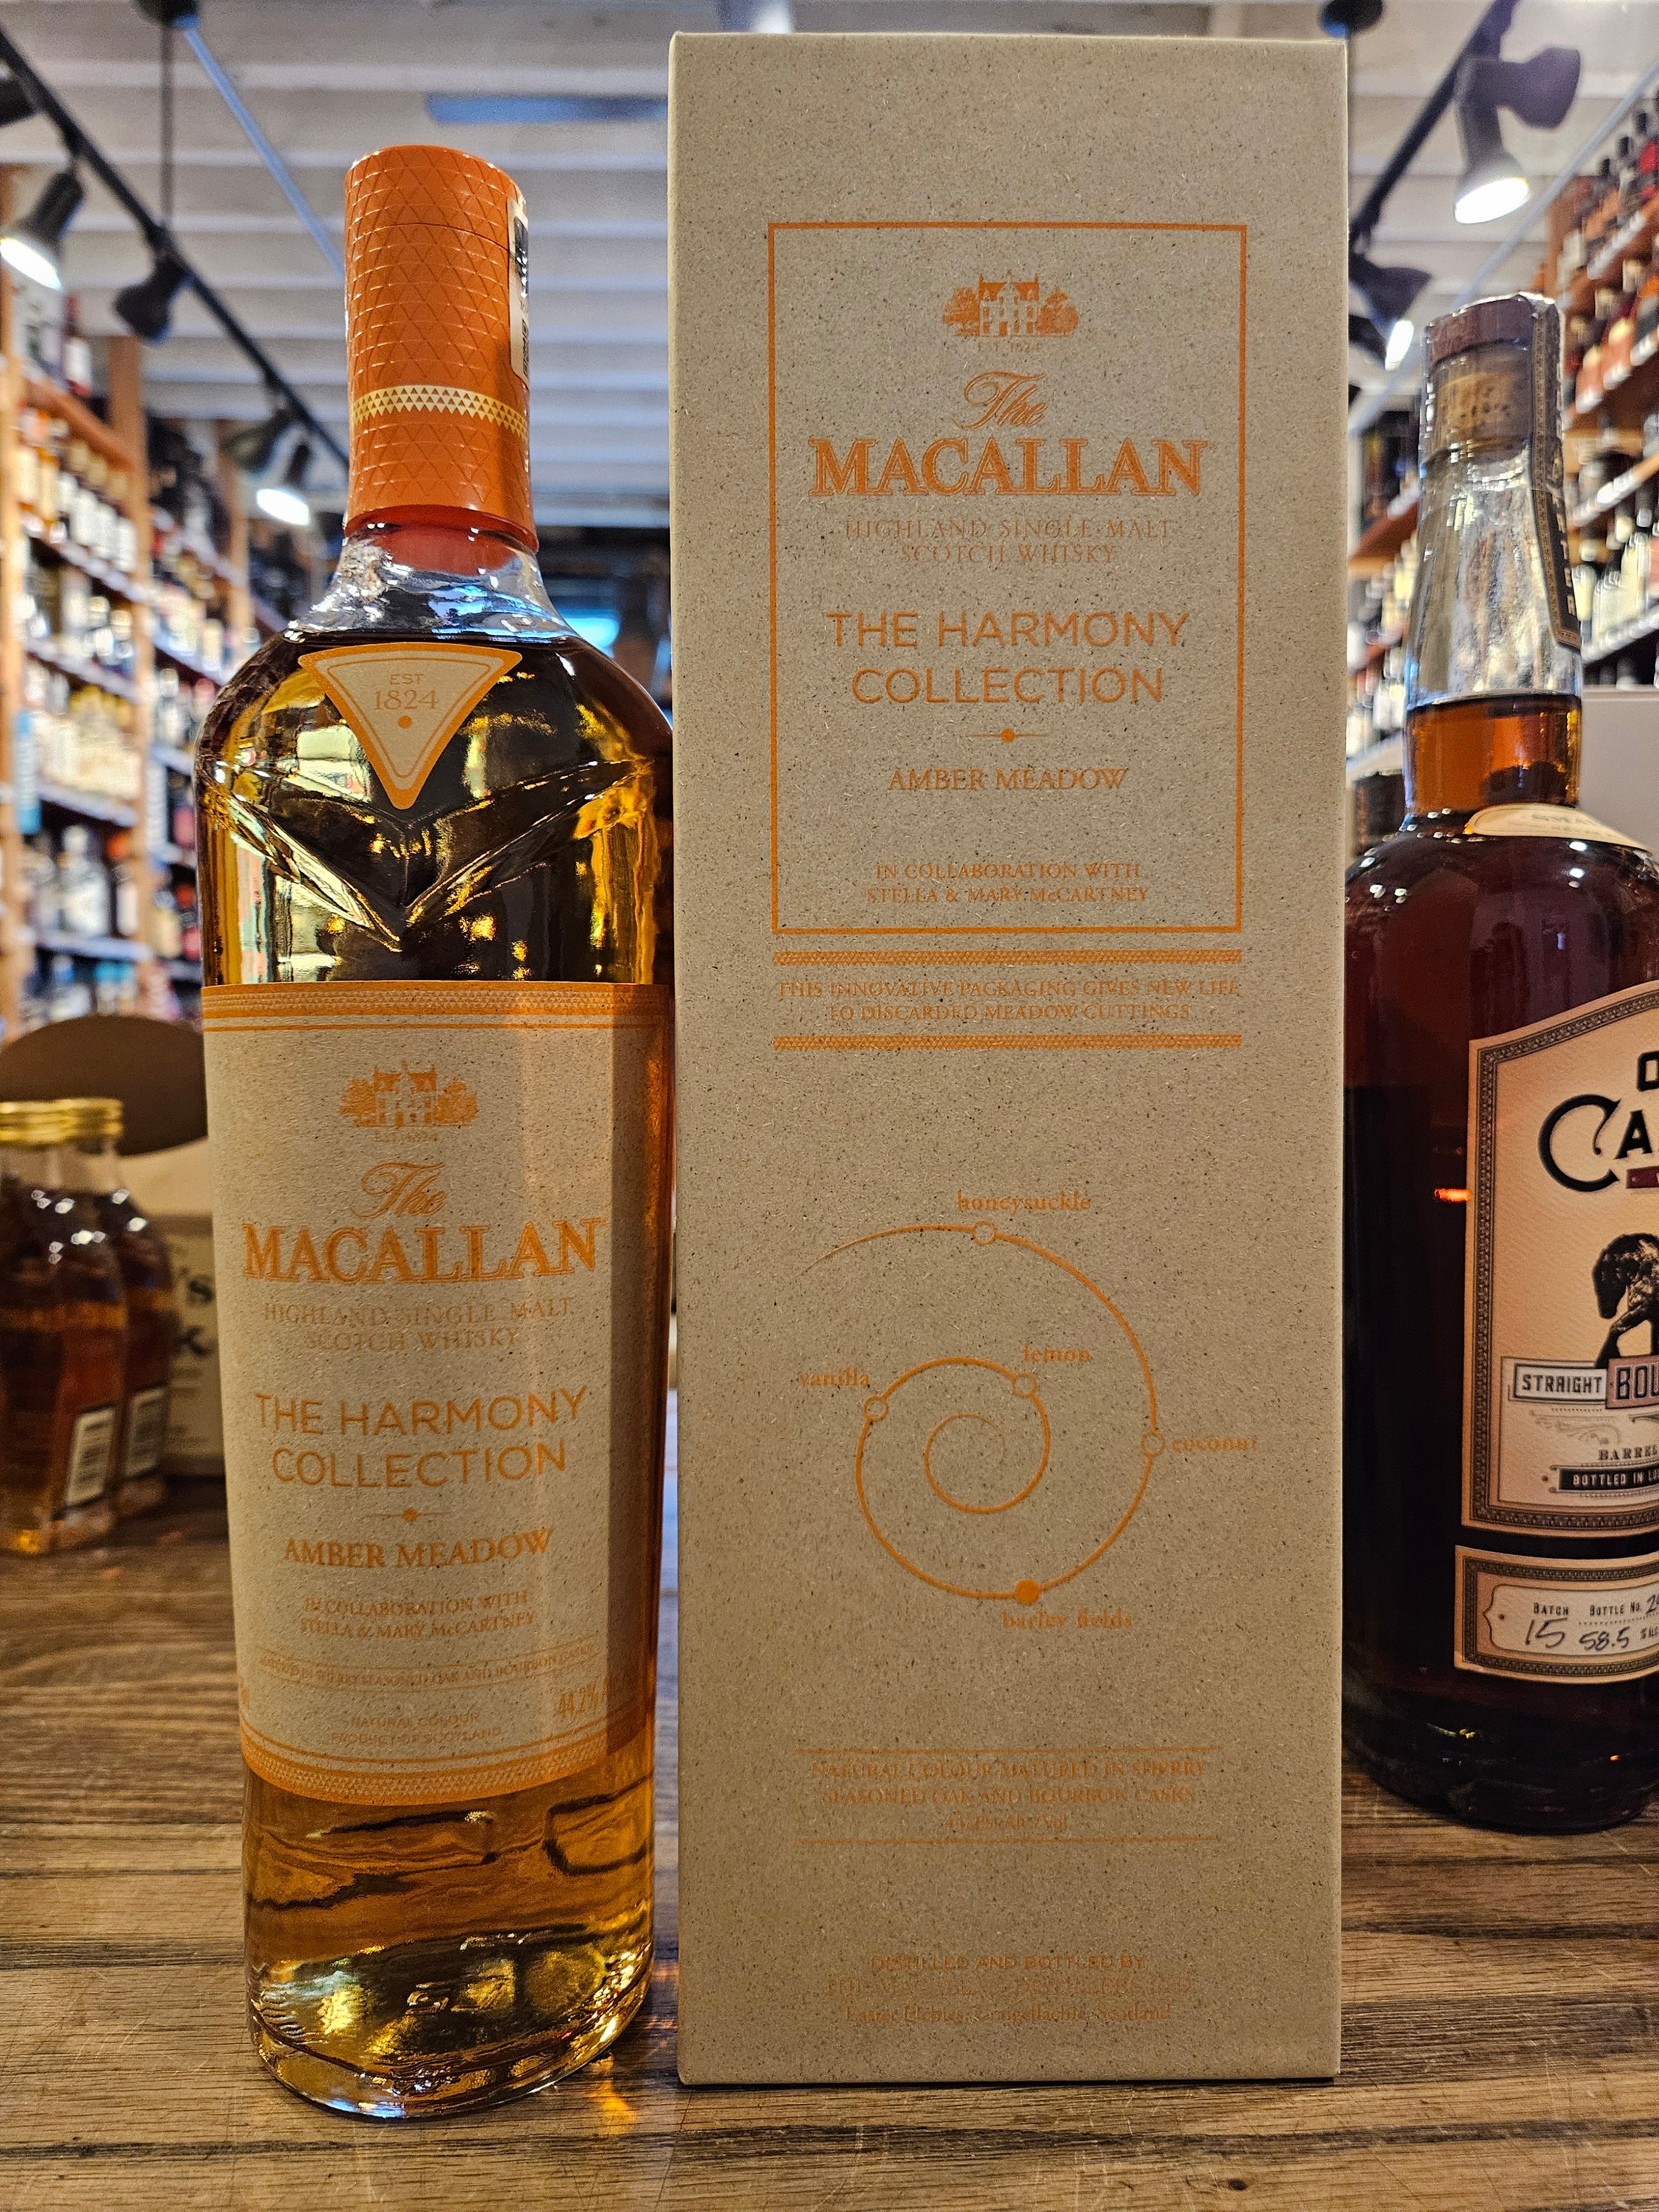 Macallan Harmony Collection Amber Meadow 750mL a tall slender clear glass bottle with a gray and orange label with an orange top next to a gray and orange box